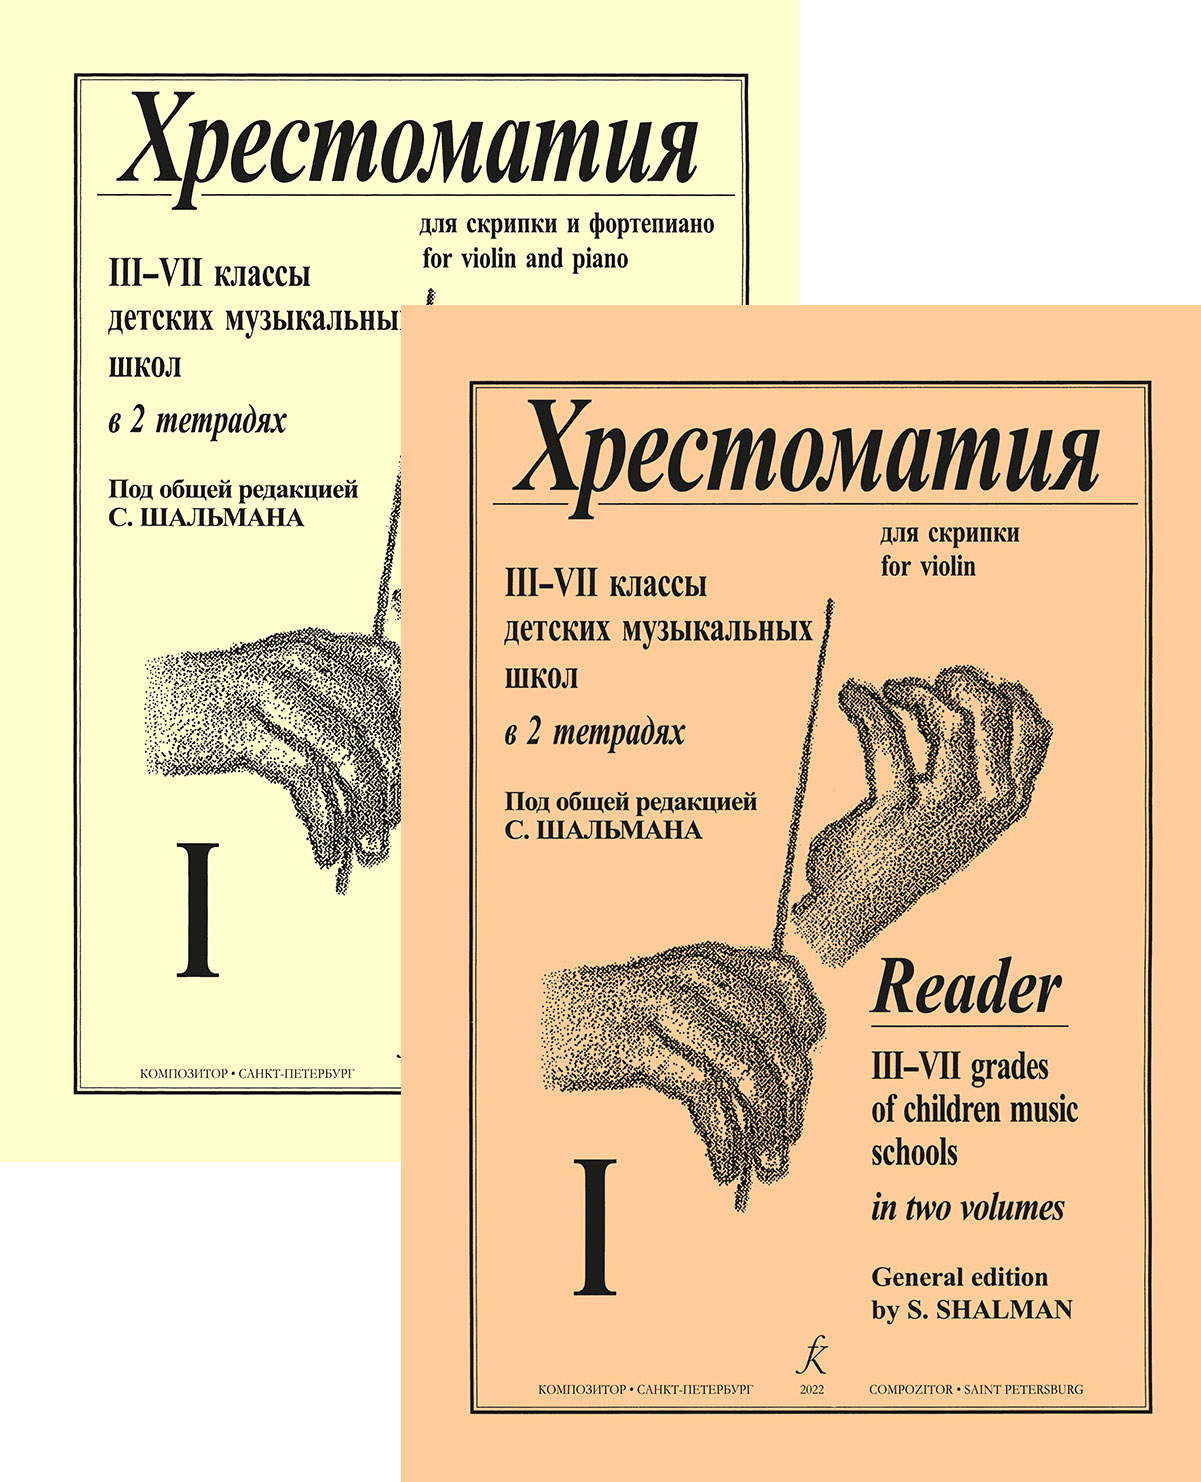 Schalman S. Comp. Reader. Vol. 1. For 3–7 forms. For violin and piano. Score and part